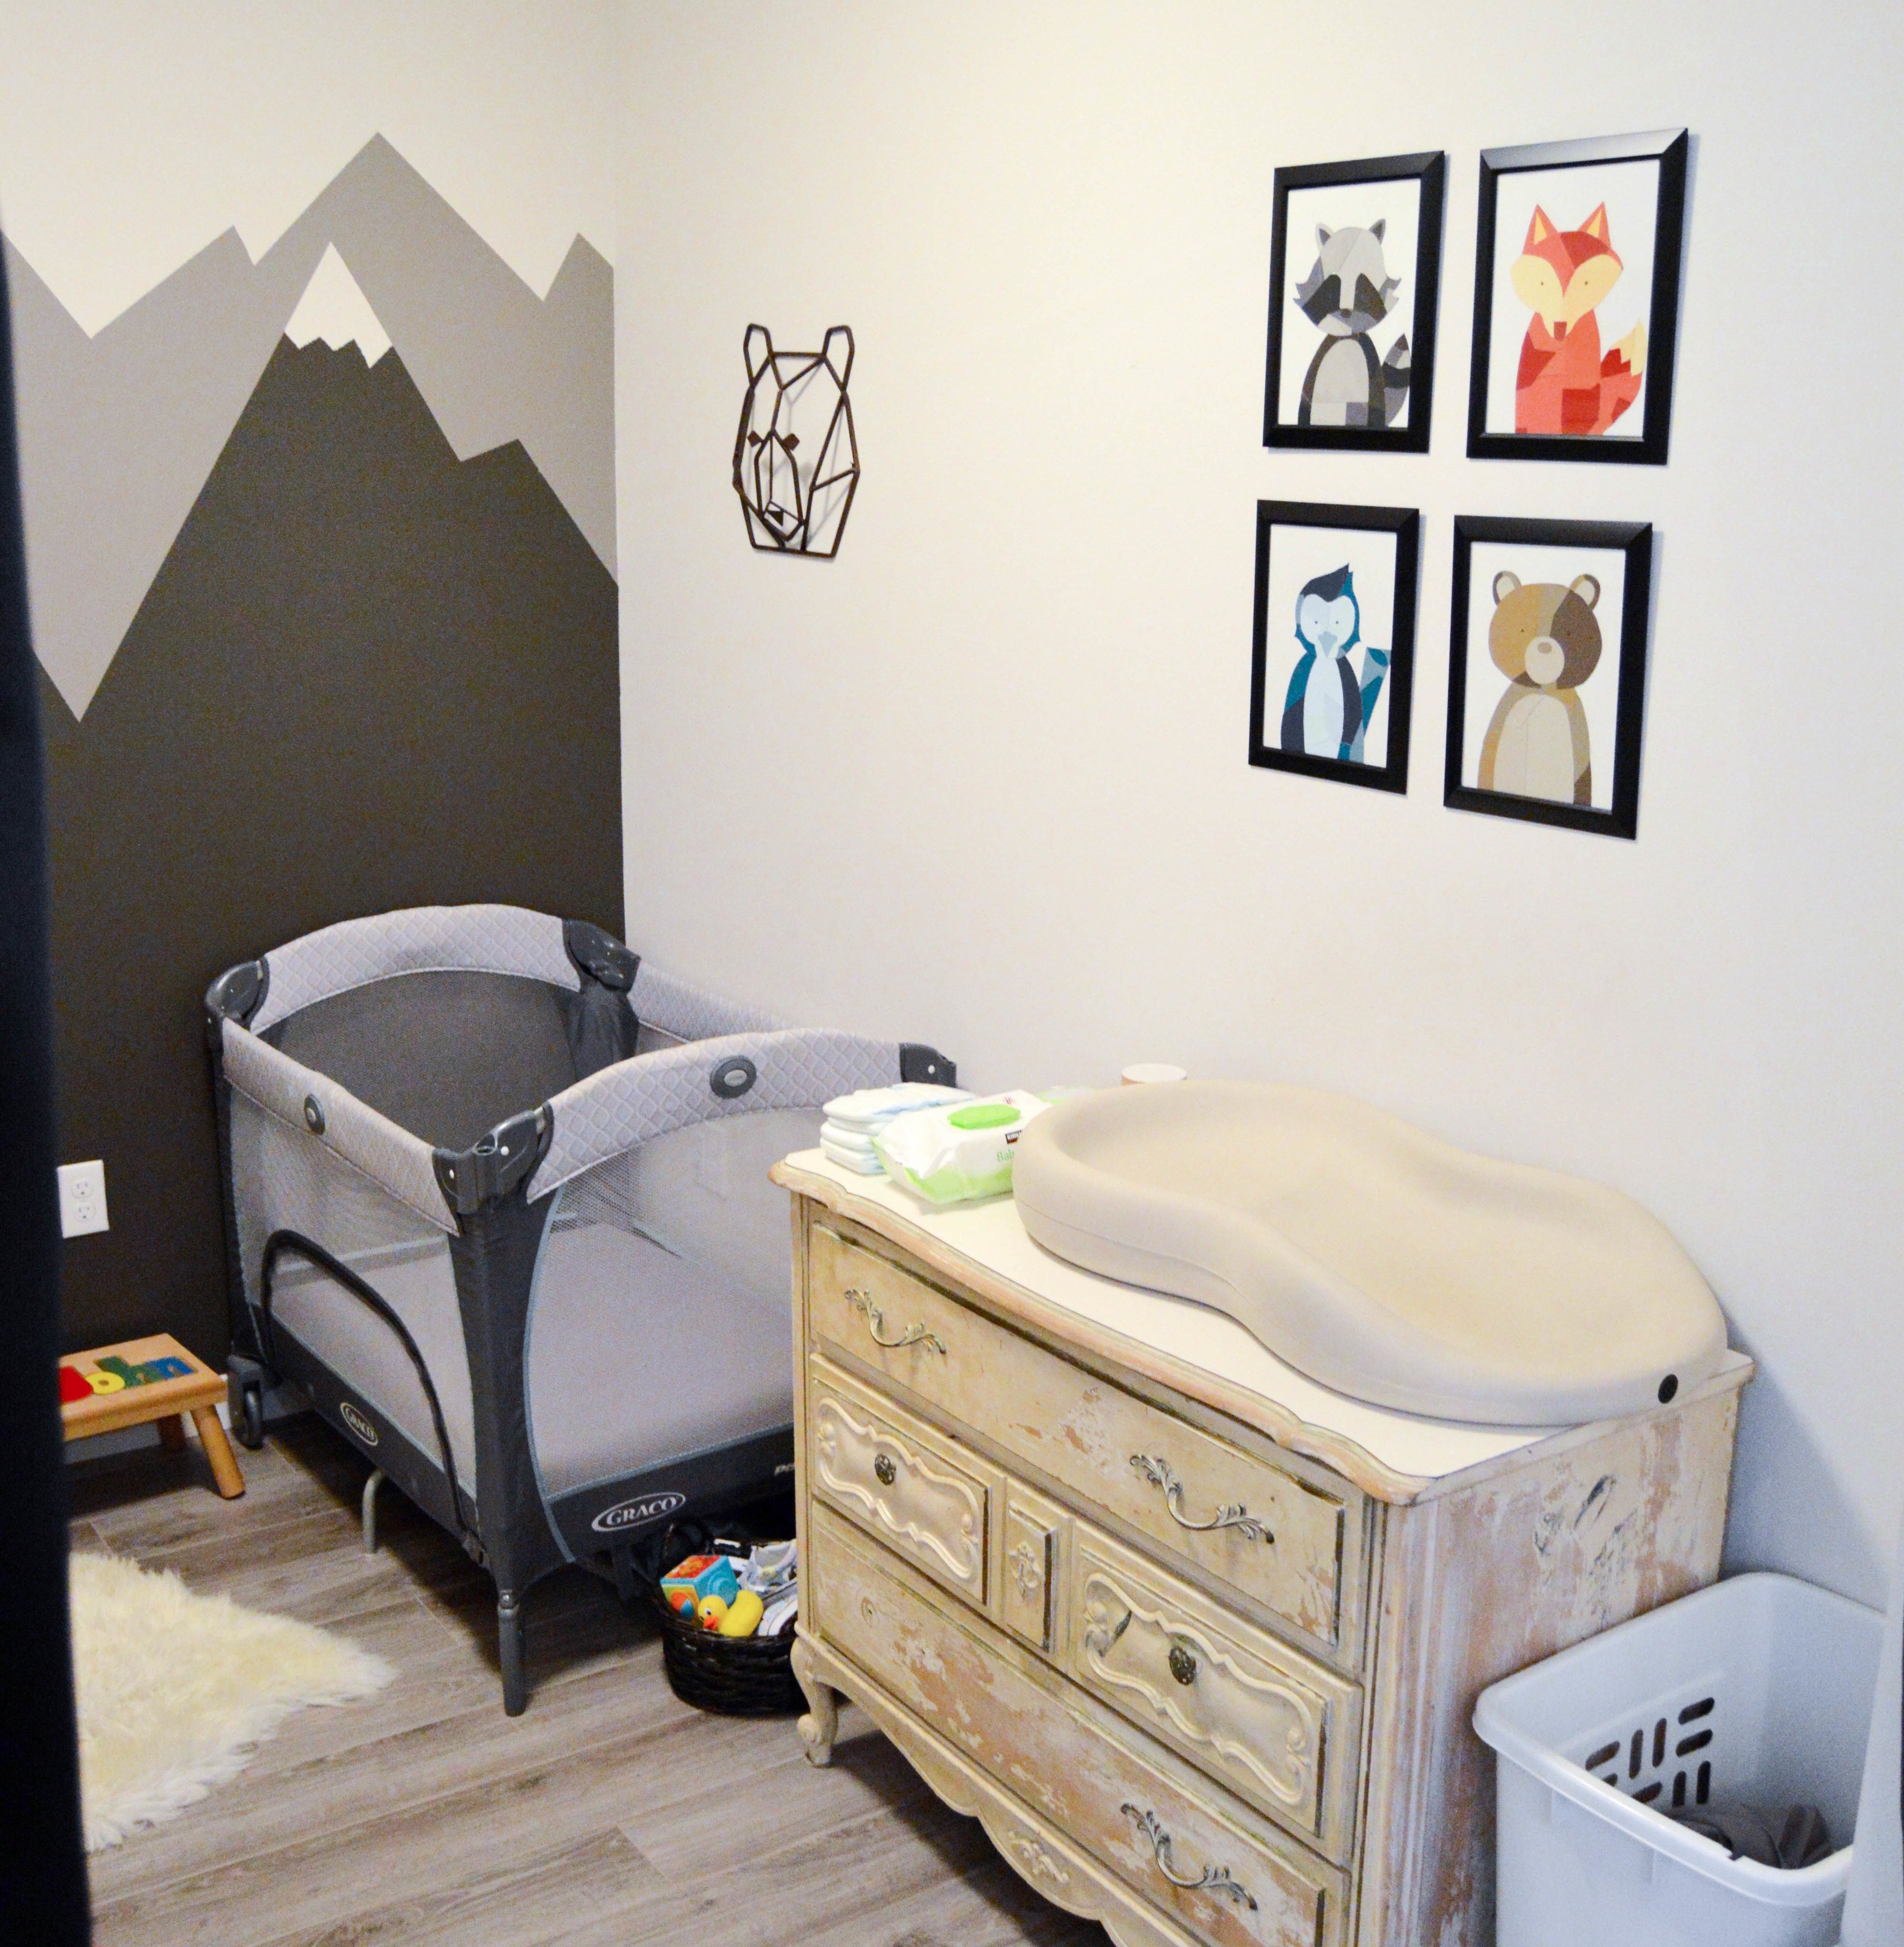 Paint Chip Art - Small PNW (Pacific Northwest) outdoor theme nursery with mountains + animals for our baby boy. Mountain mural and paint chip art tutorial for woodland feel.